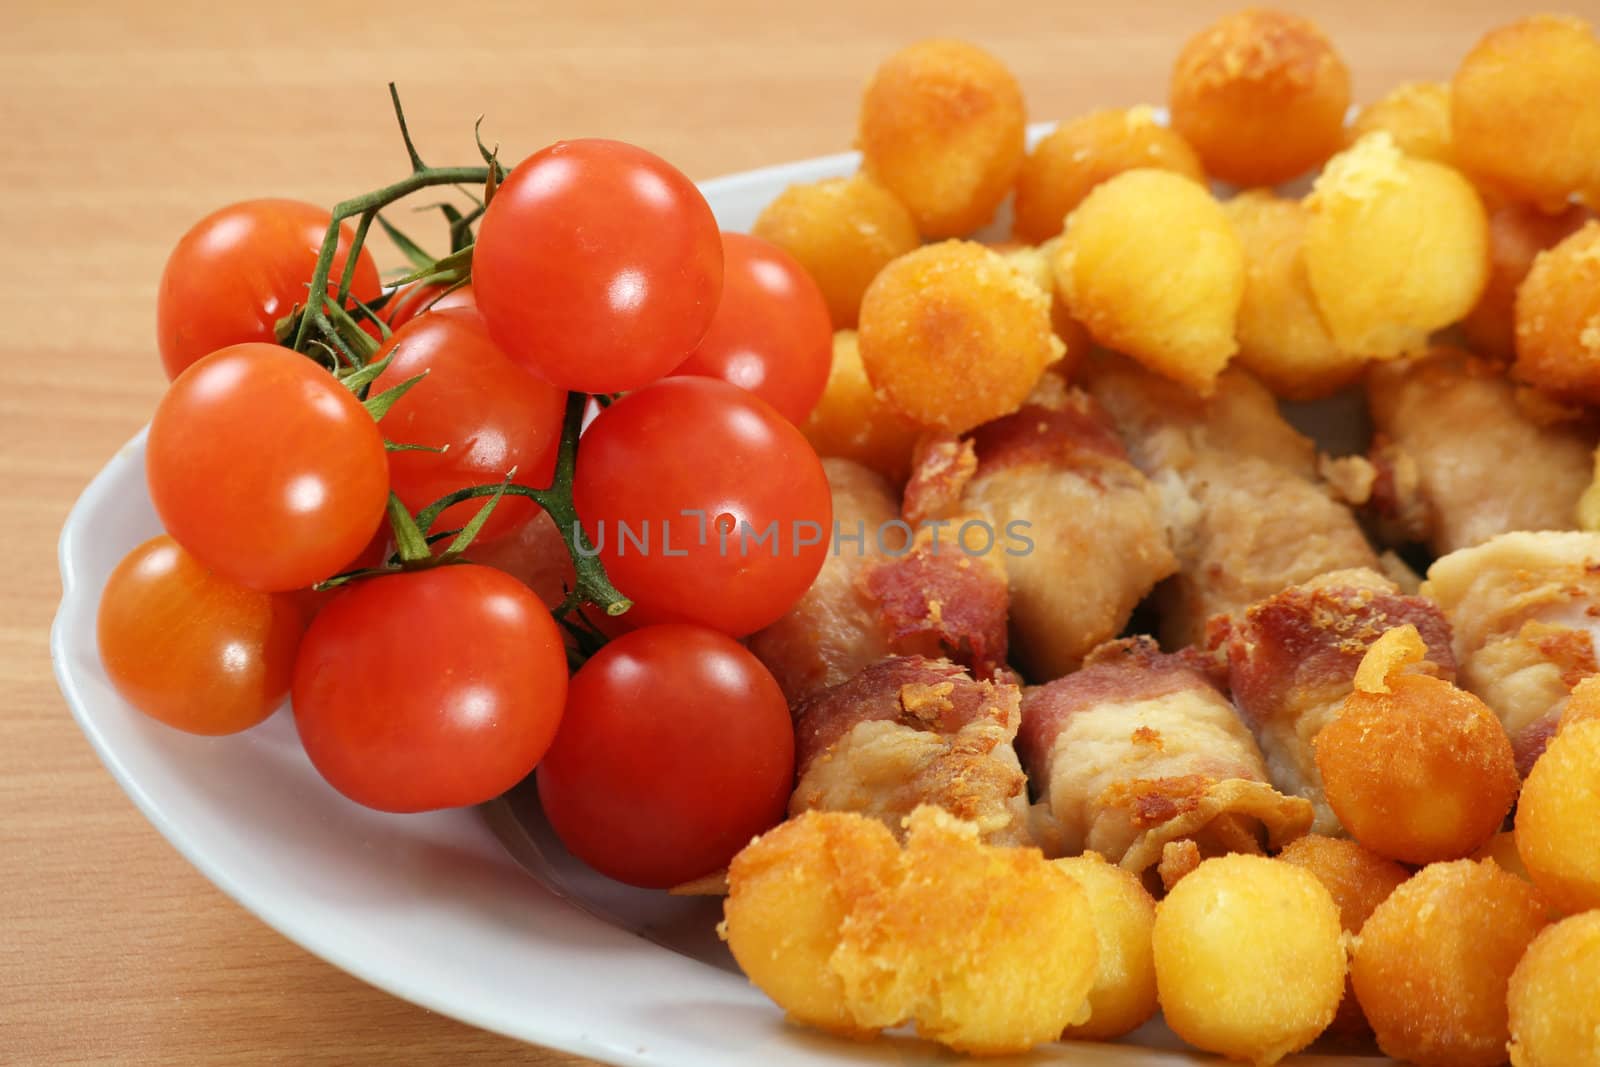 chicken meat bacon tomato and potatoes gourmet food